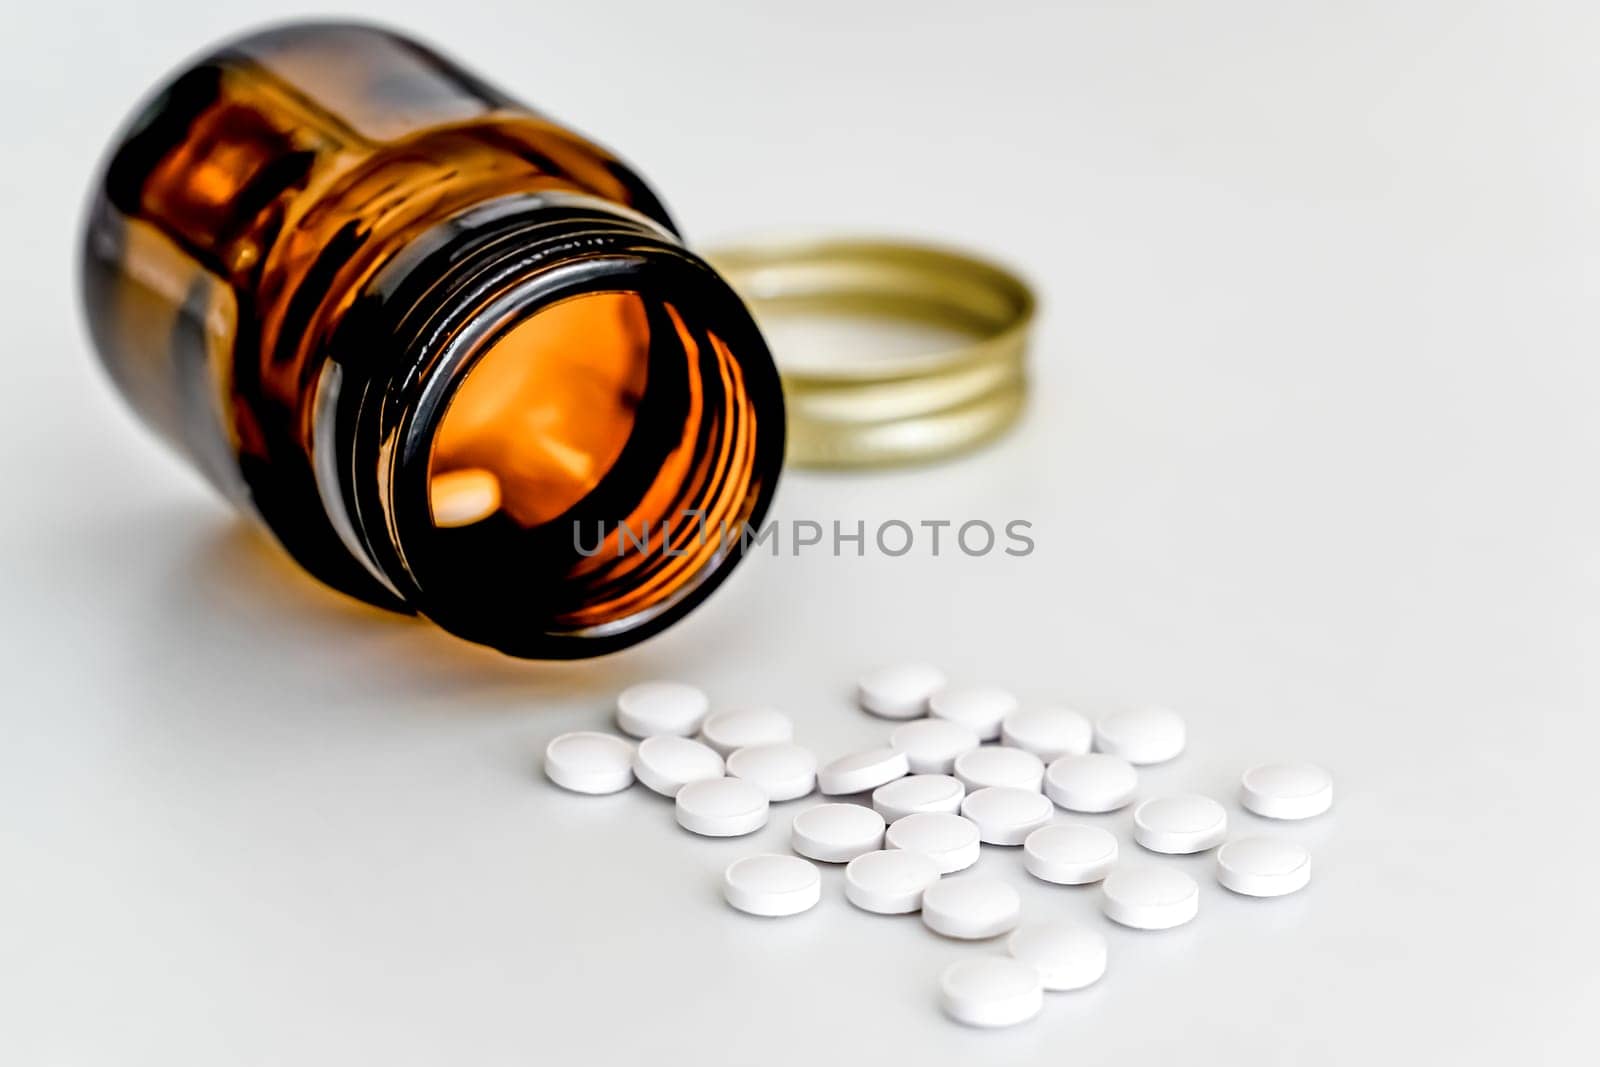 White Pills Scattered on Table Next to Brown Glass Vial, on White Background, Close-up